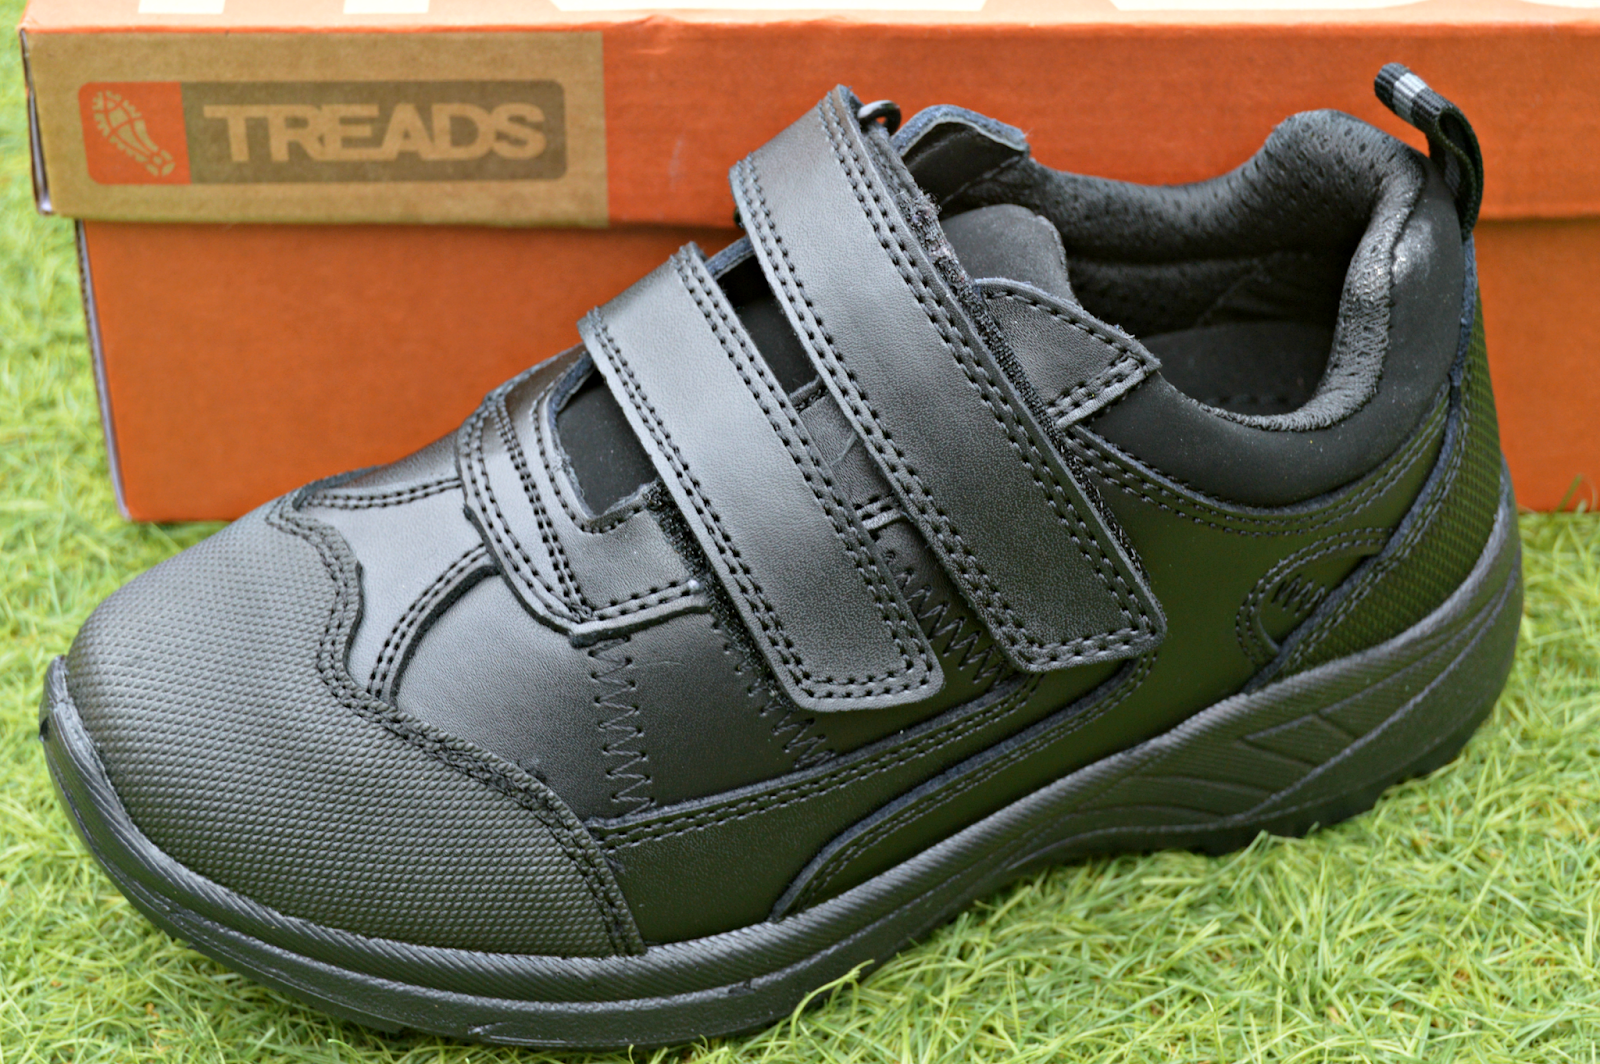 treads shoes